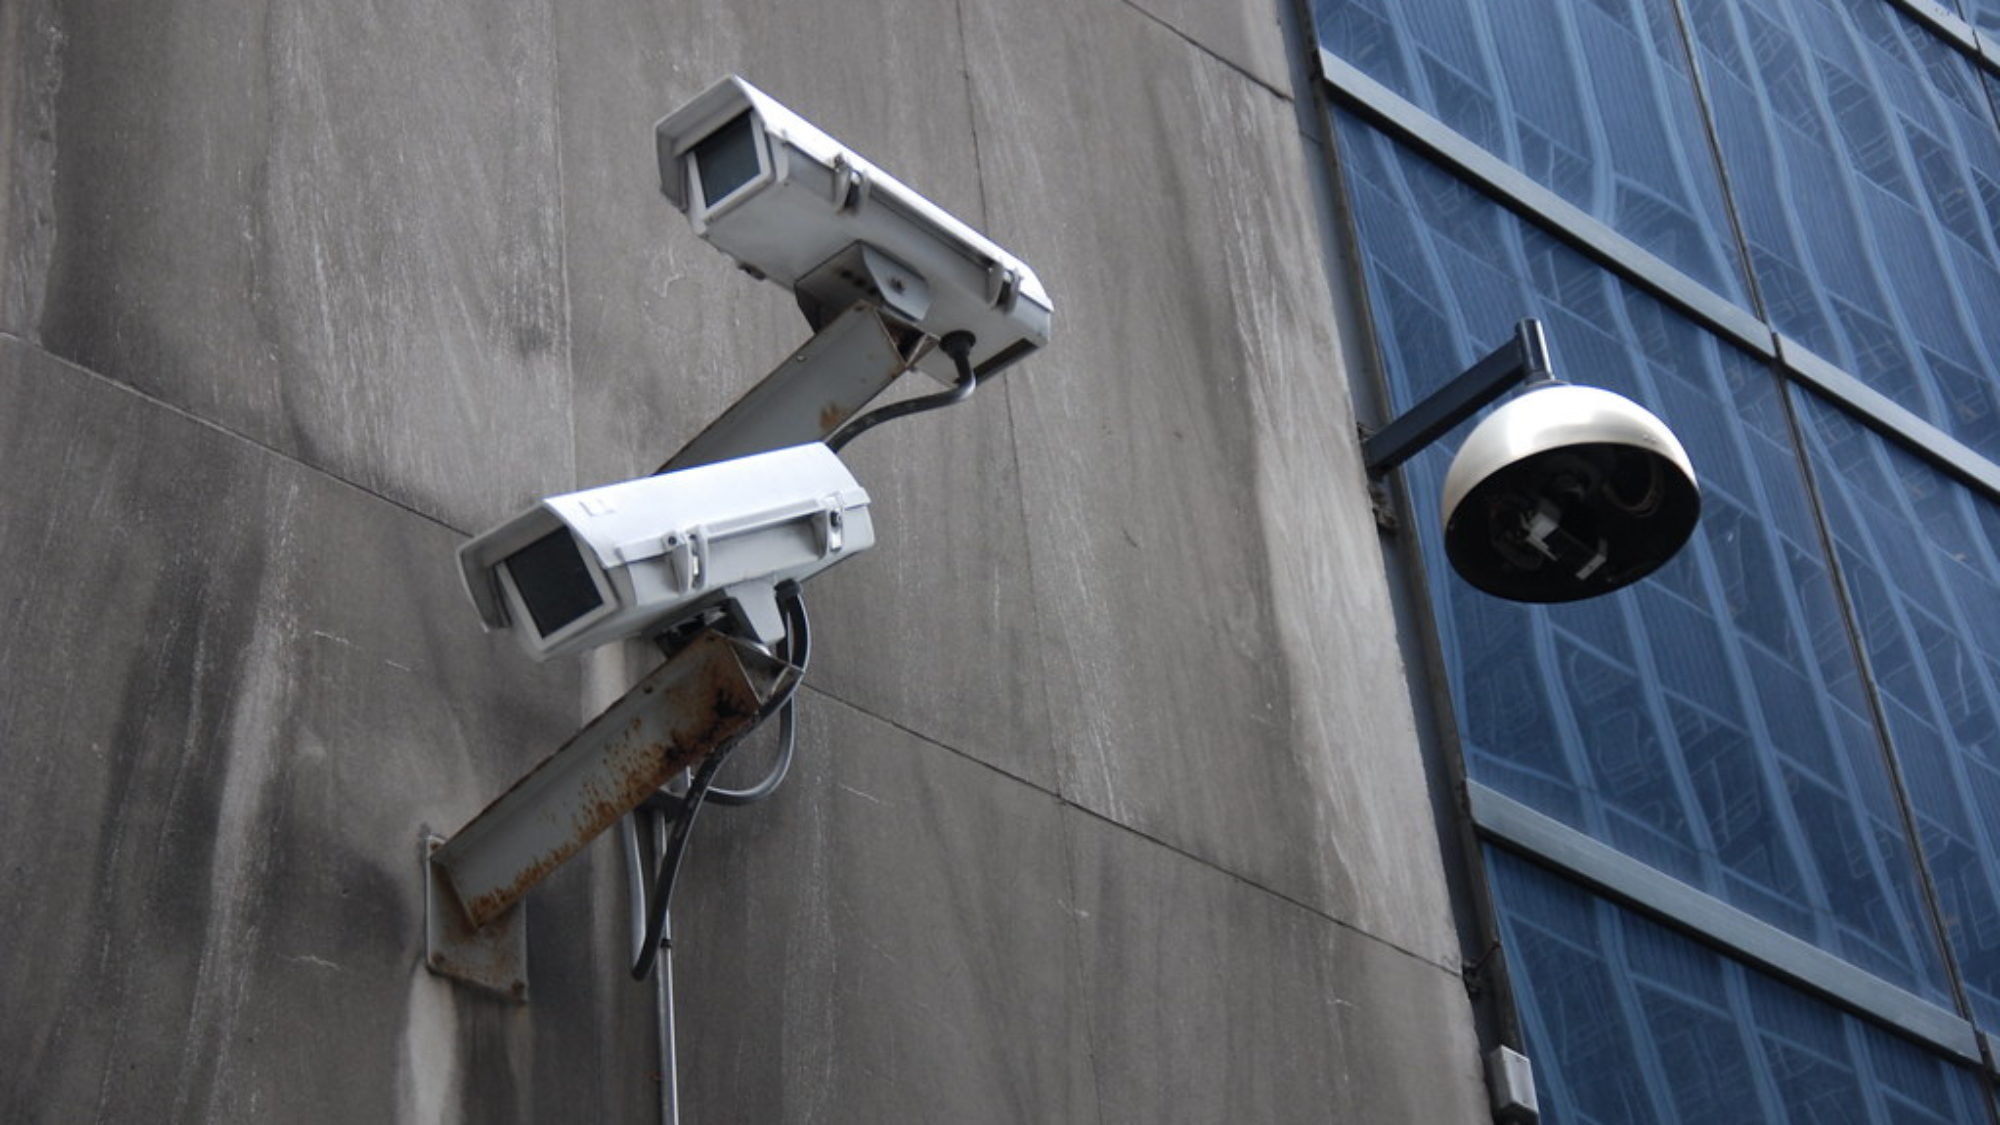 Two video surveillance cameras on the side of a building.